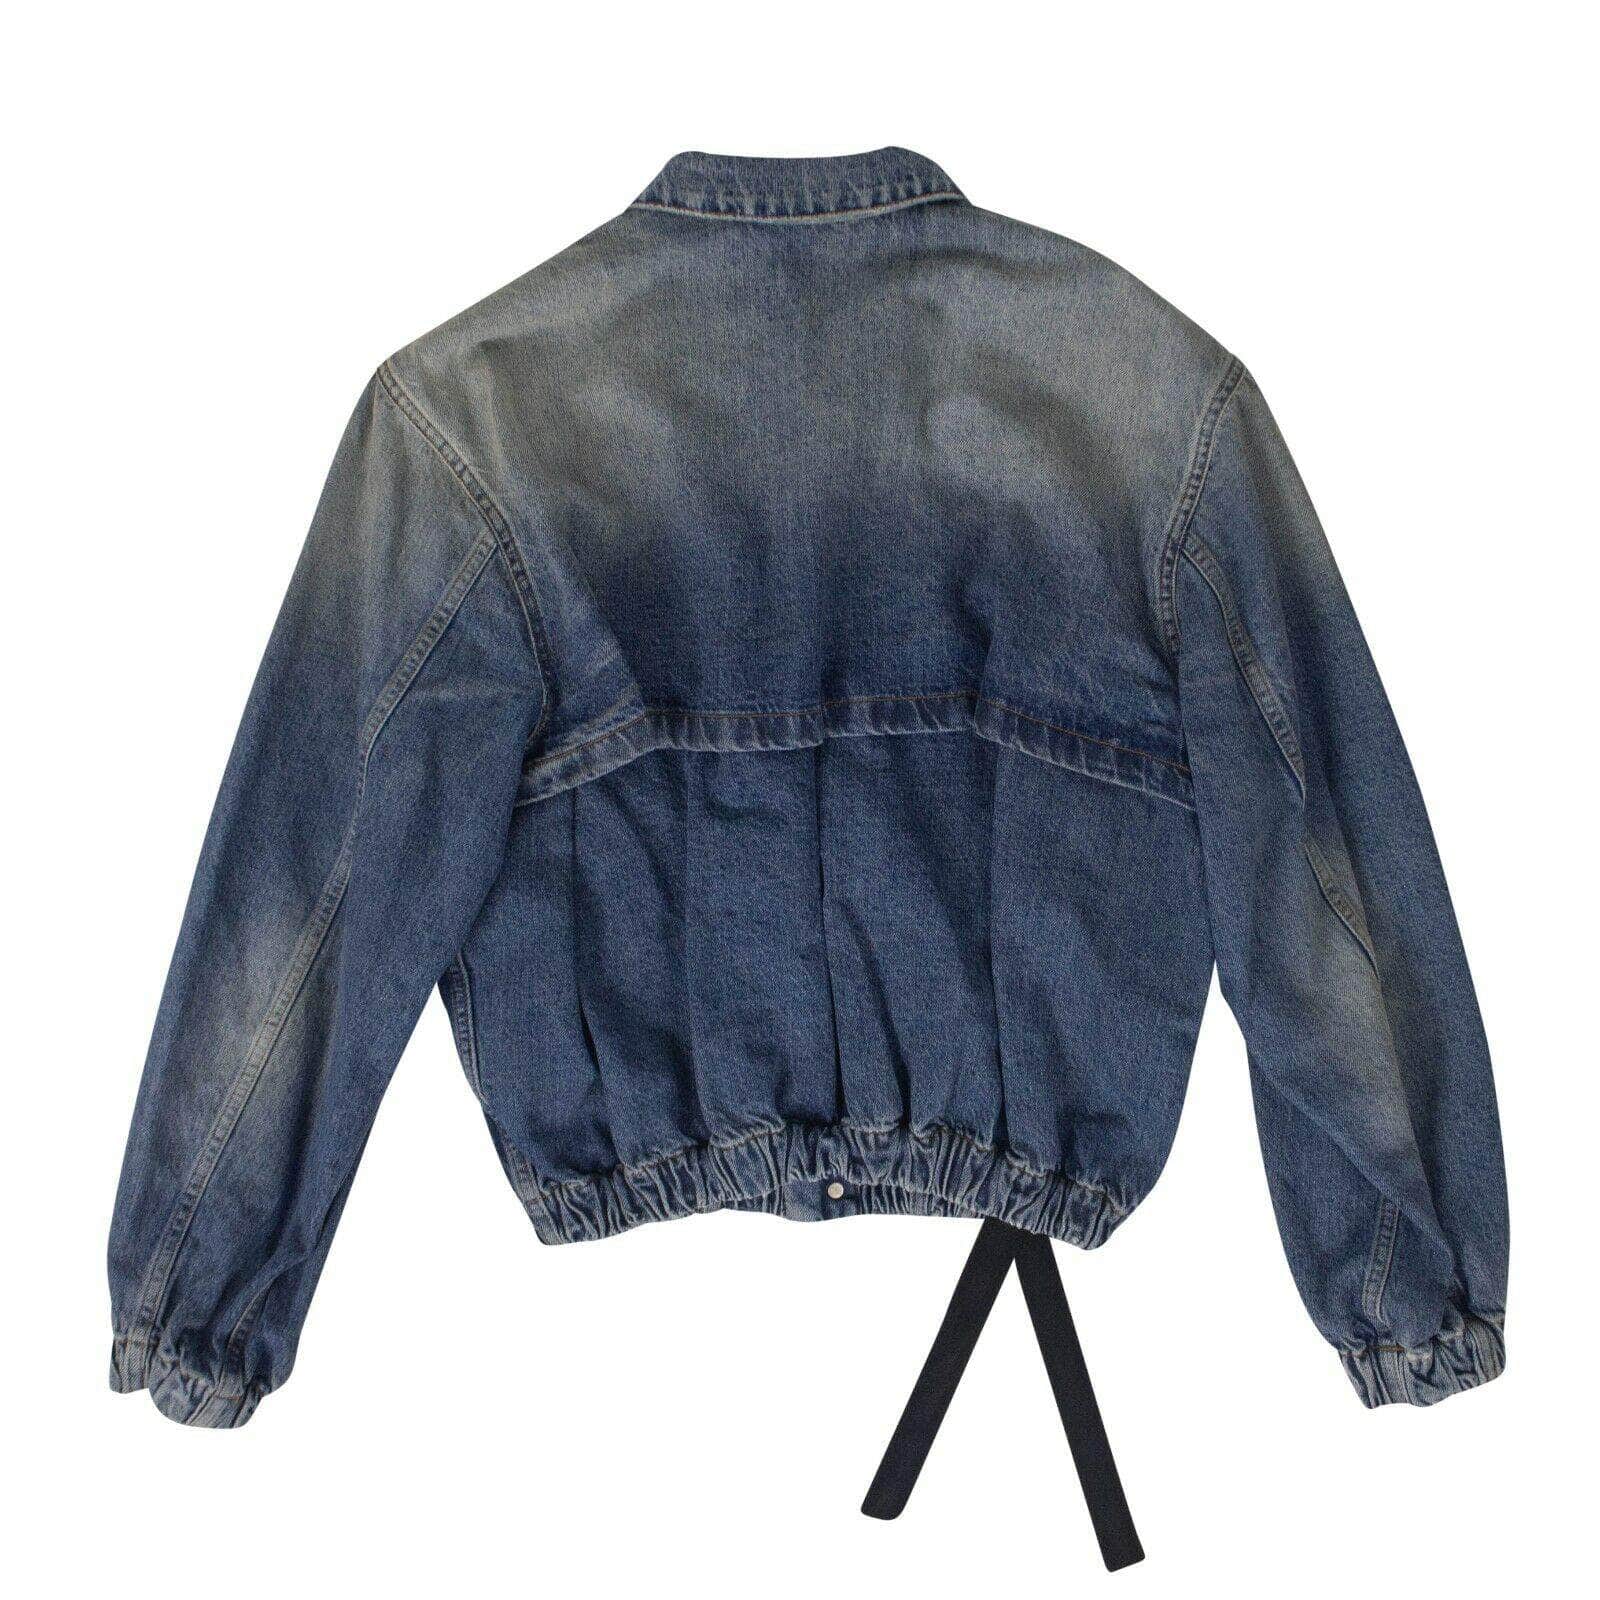 Unravel Project couponcollection, gender-mens, jacket, main-clothing, MBUP, size-46, size-48, size-50, size-52, under-250, unravel-project Cotton Oversized Denim Jacket - Blue